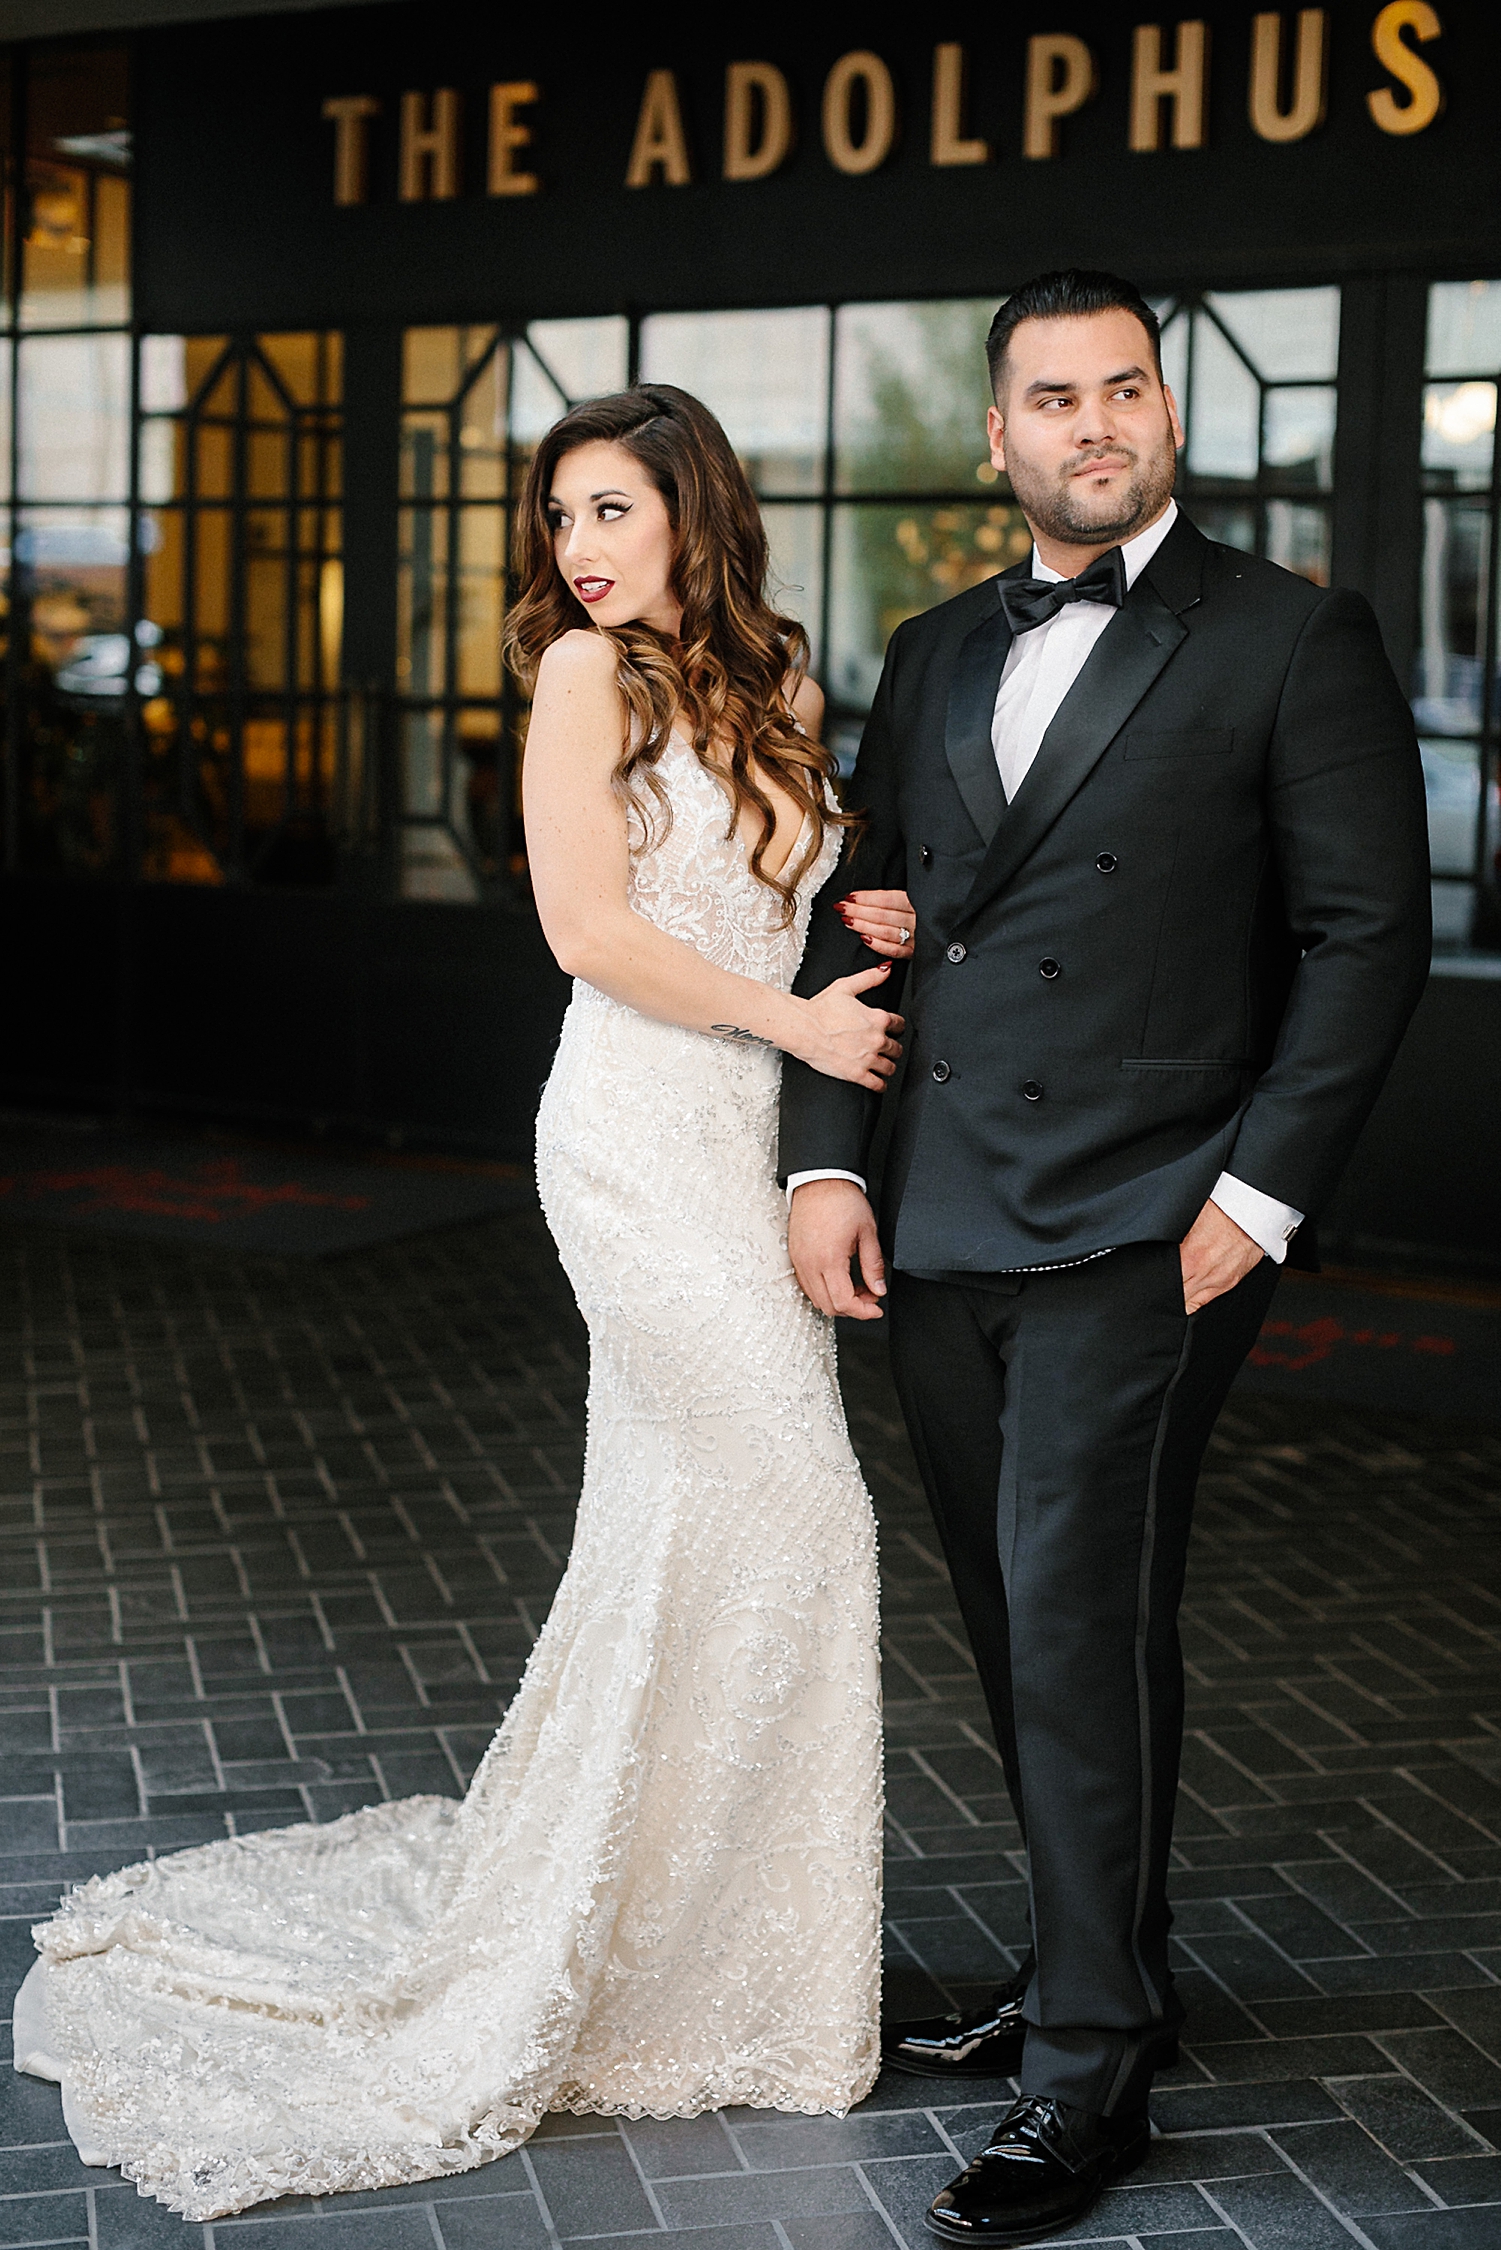 bride in wedding dress and groom in double breasted tuxedo standing together outside adolphus hotel Dallas